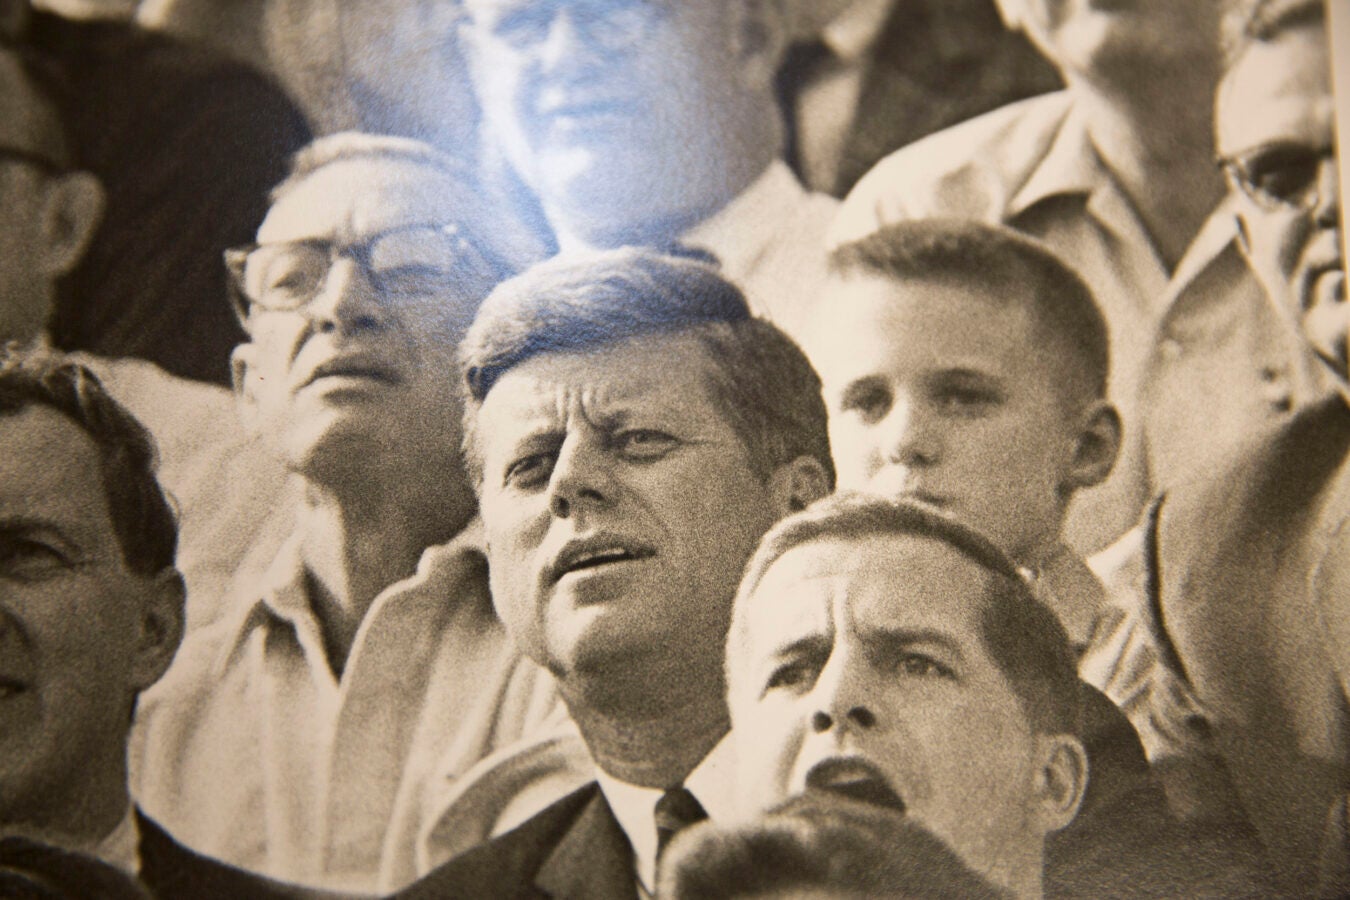 President Kennedy attends a Harvard football game in October 1963.